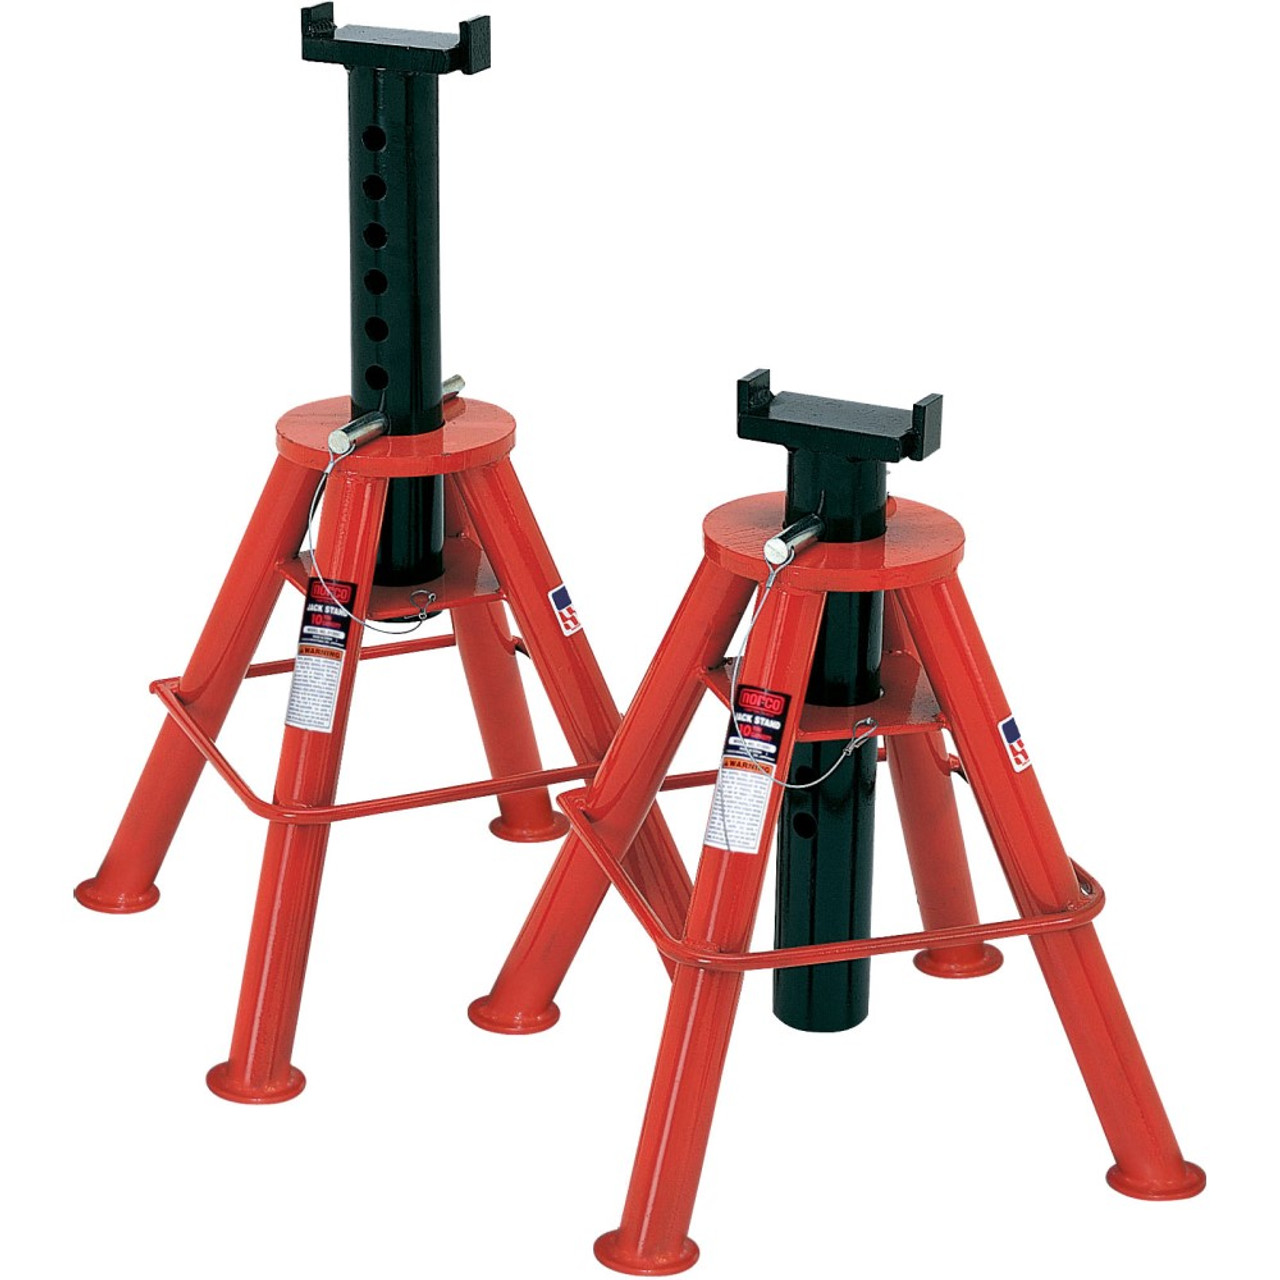 Norco 81208: 10 Ton Short Height Jack Stands